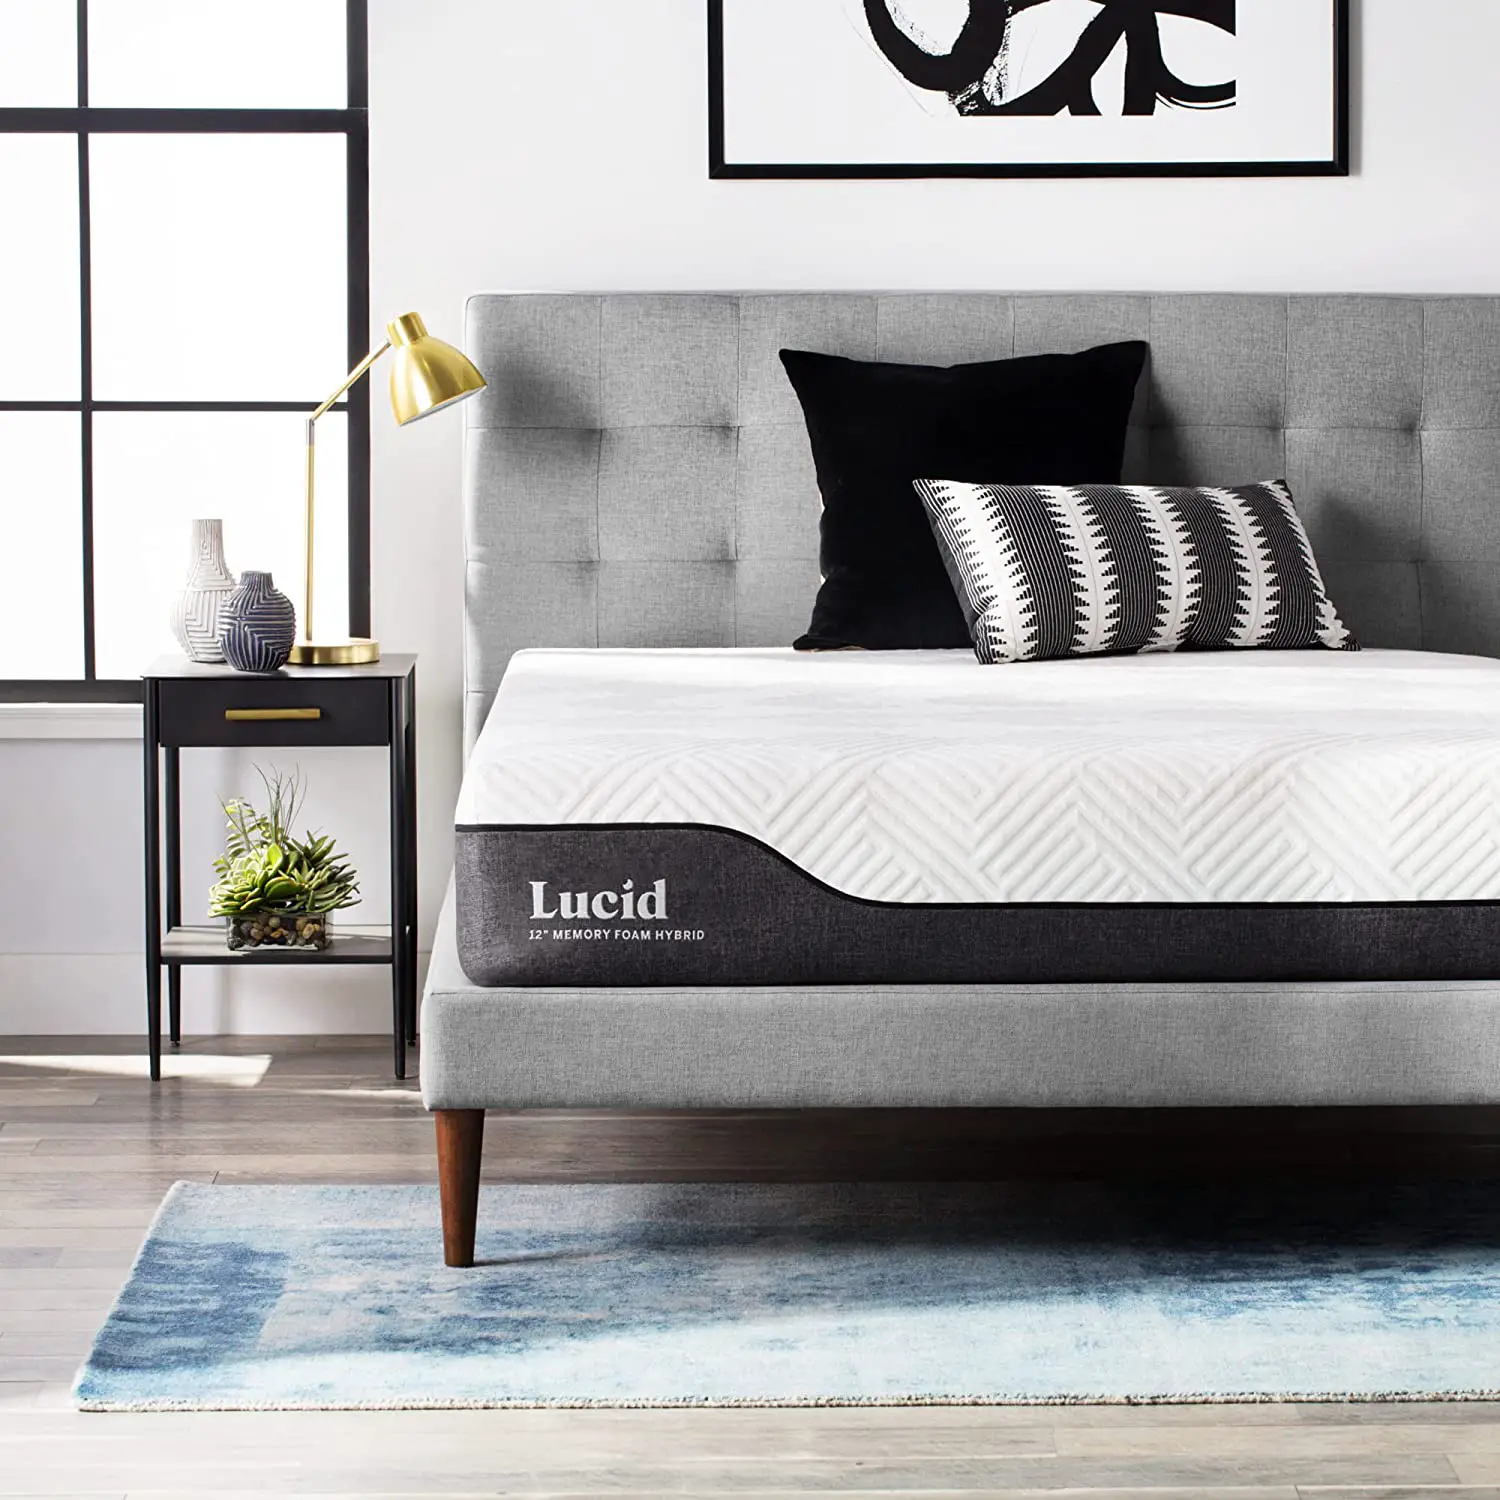 Lucid 12 Inch Hybrid Mattress – Bamboo Charcoal And Aloe Vera Infused